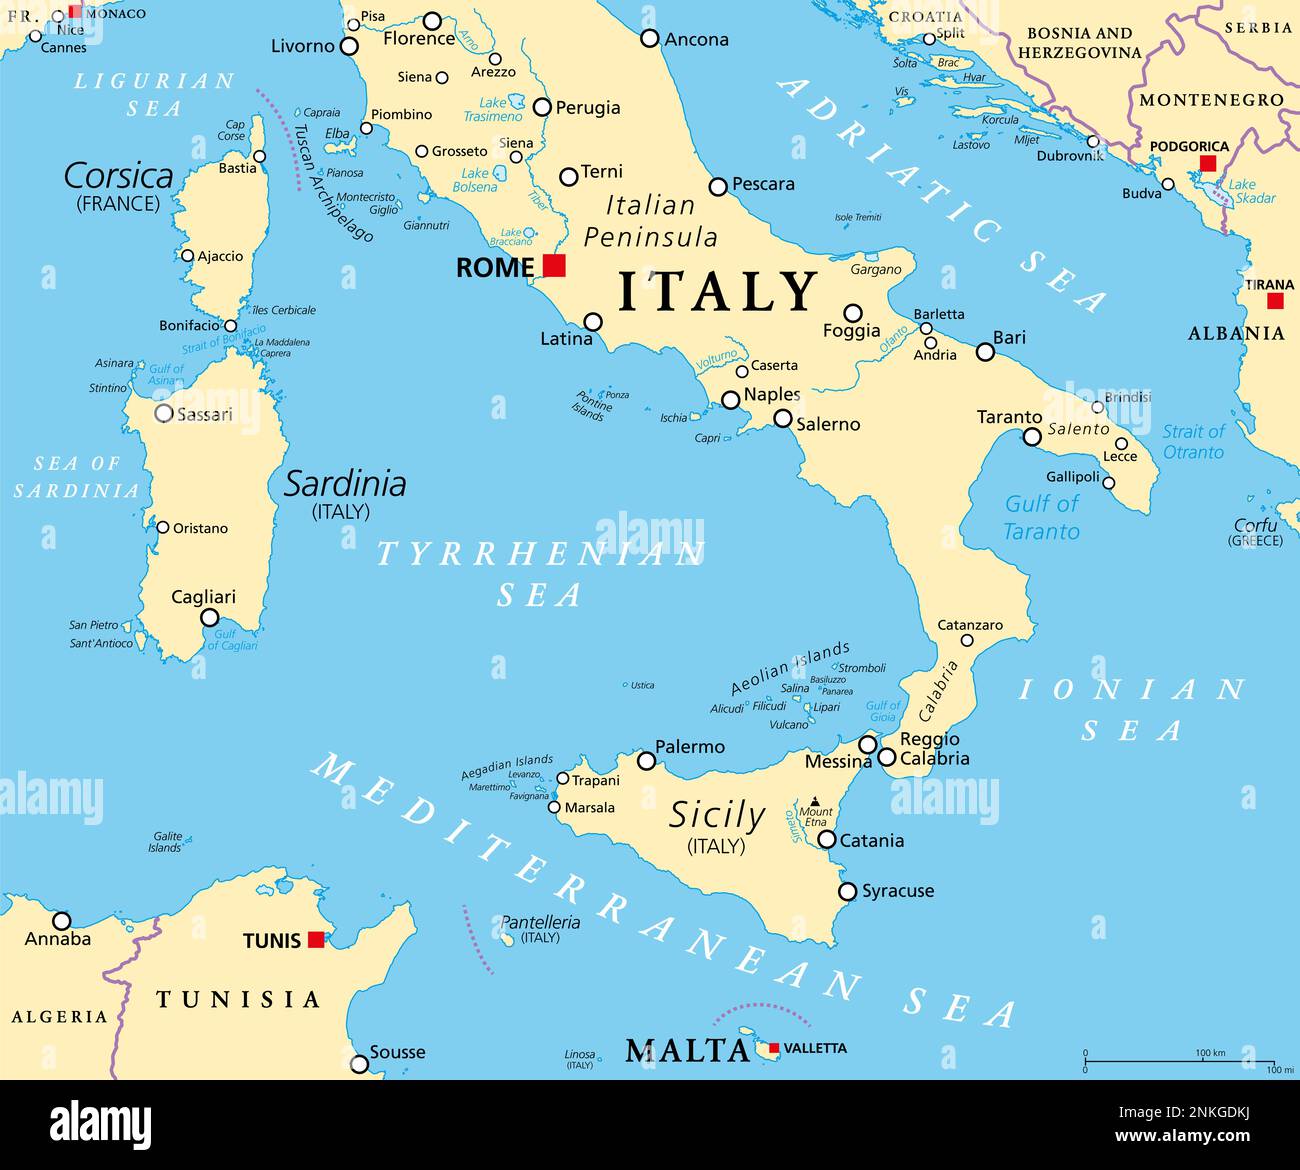 Southern Italy, known as Meridione or Mezzogiorno, political map. Macroregion of Italy consisting of its southern regions. Stock Photo